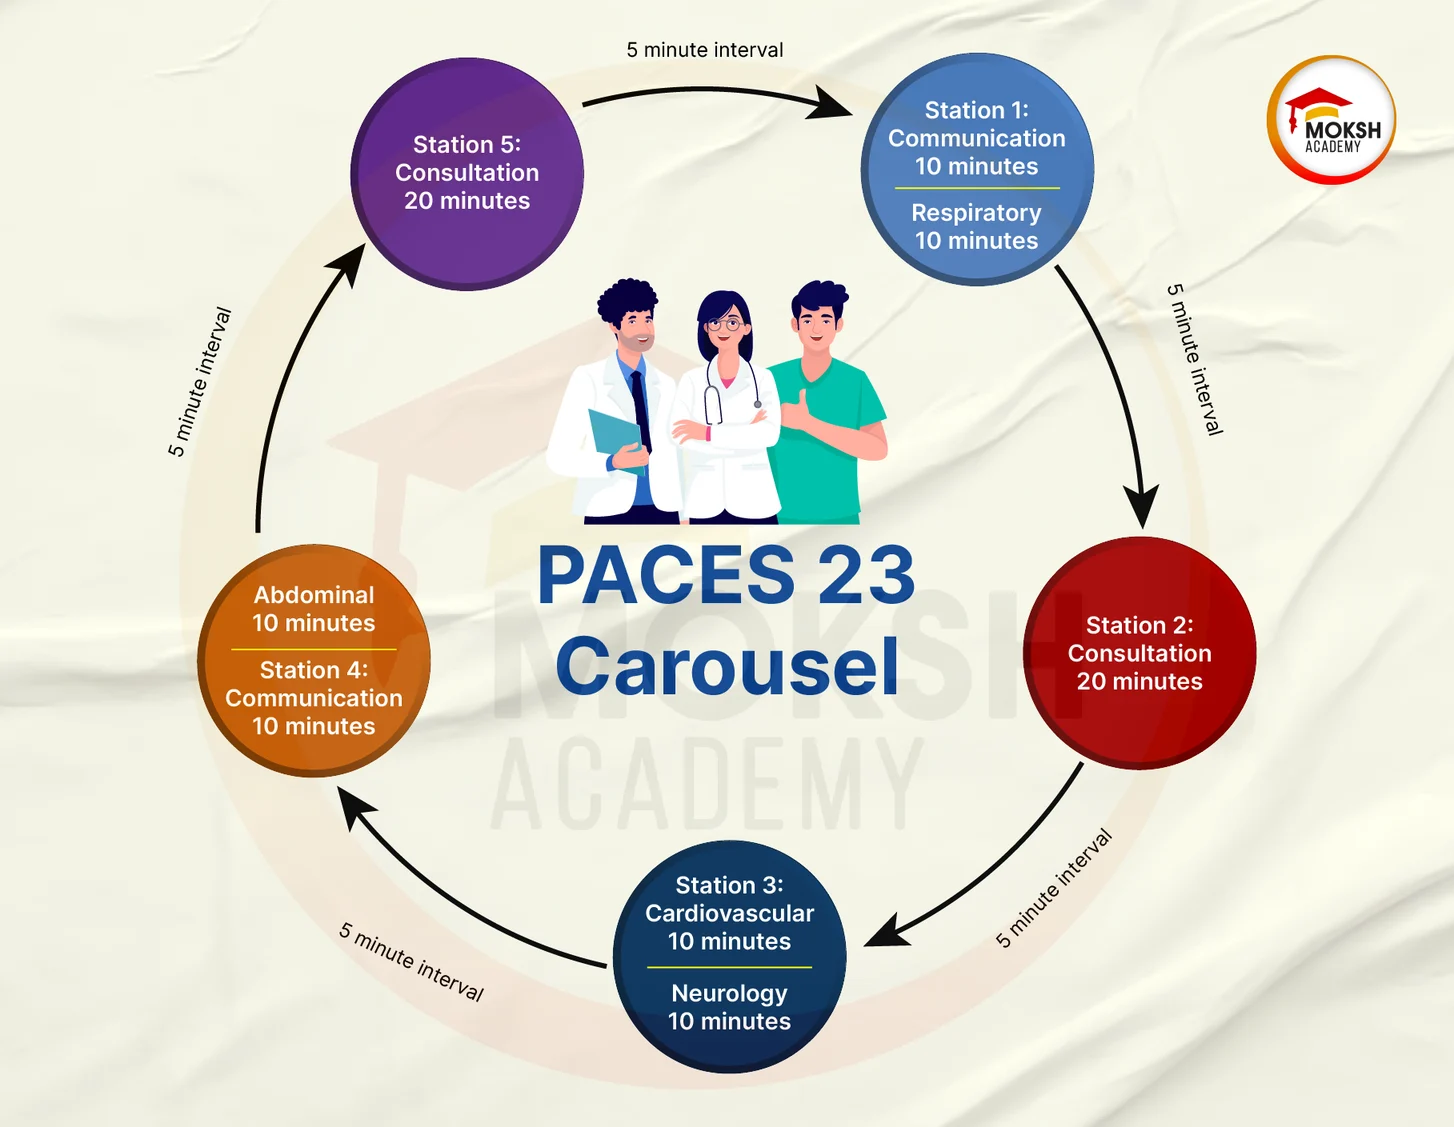 Carousel of PACES stations